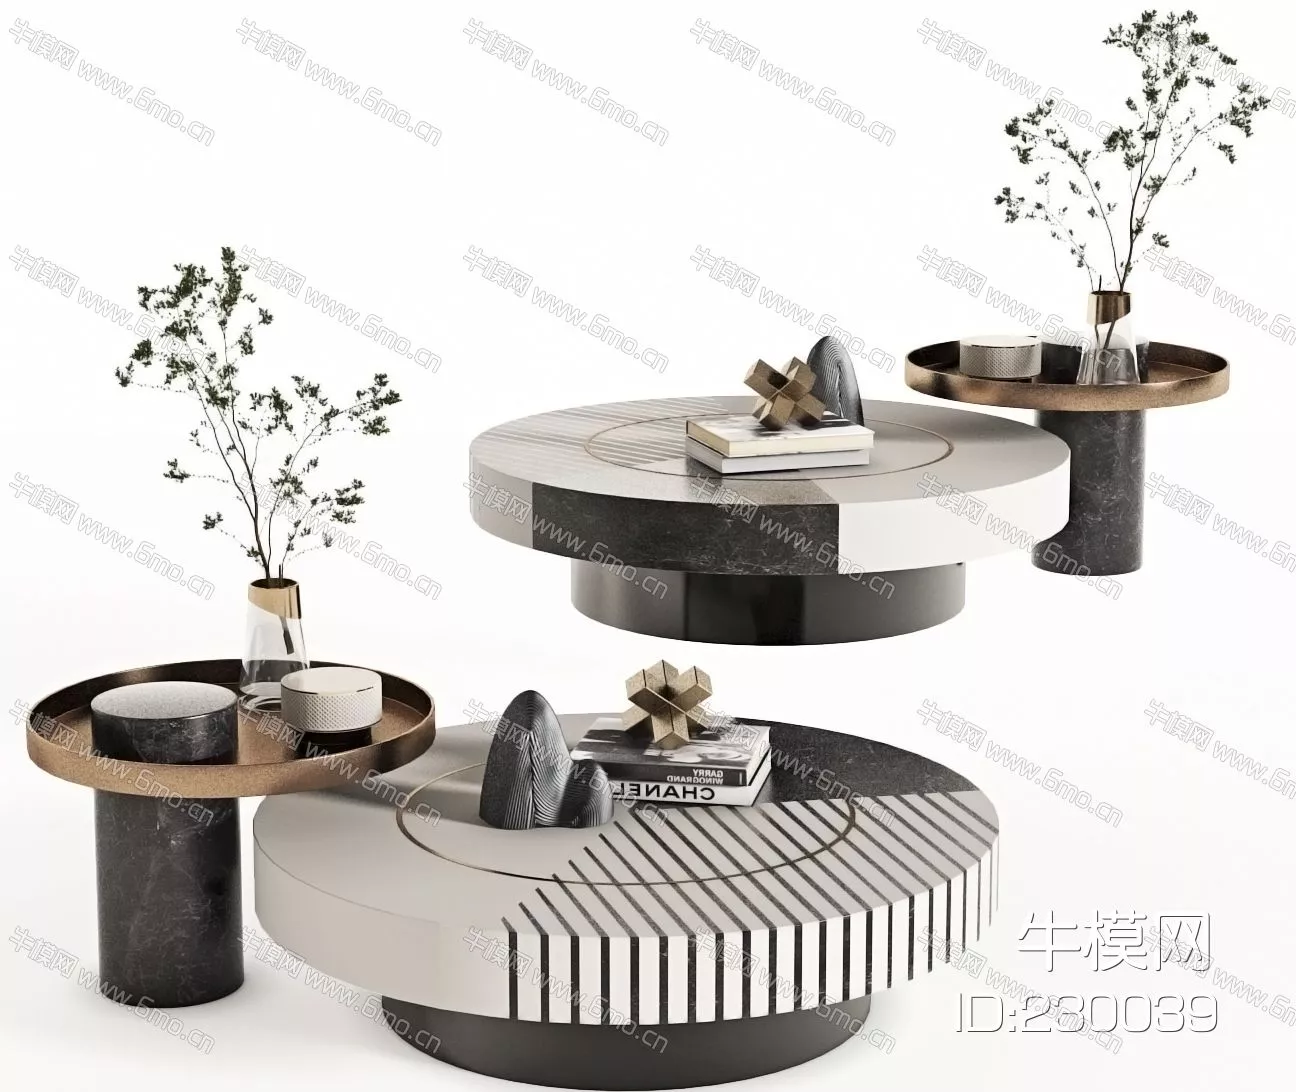 MODERN COFFEE TABLE - SKETCHUP 3D MODEL - VRAY - 230039